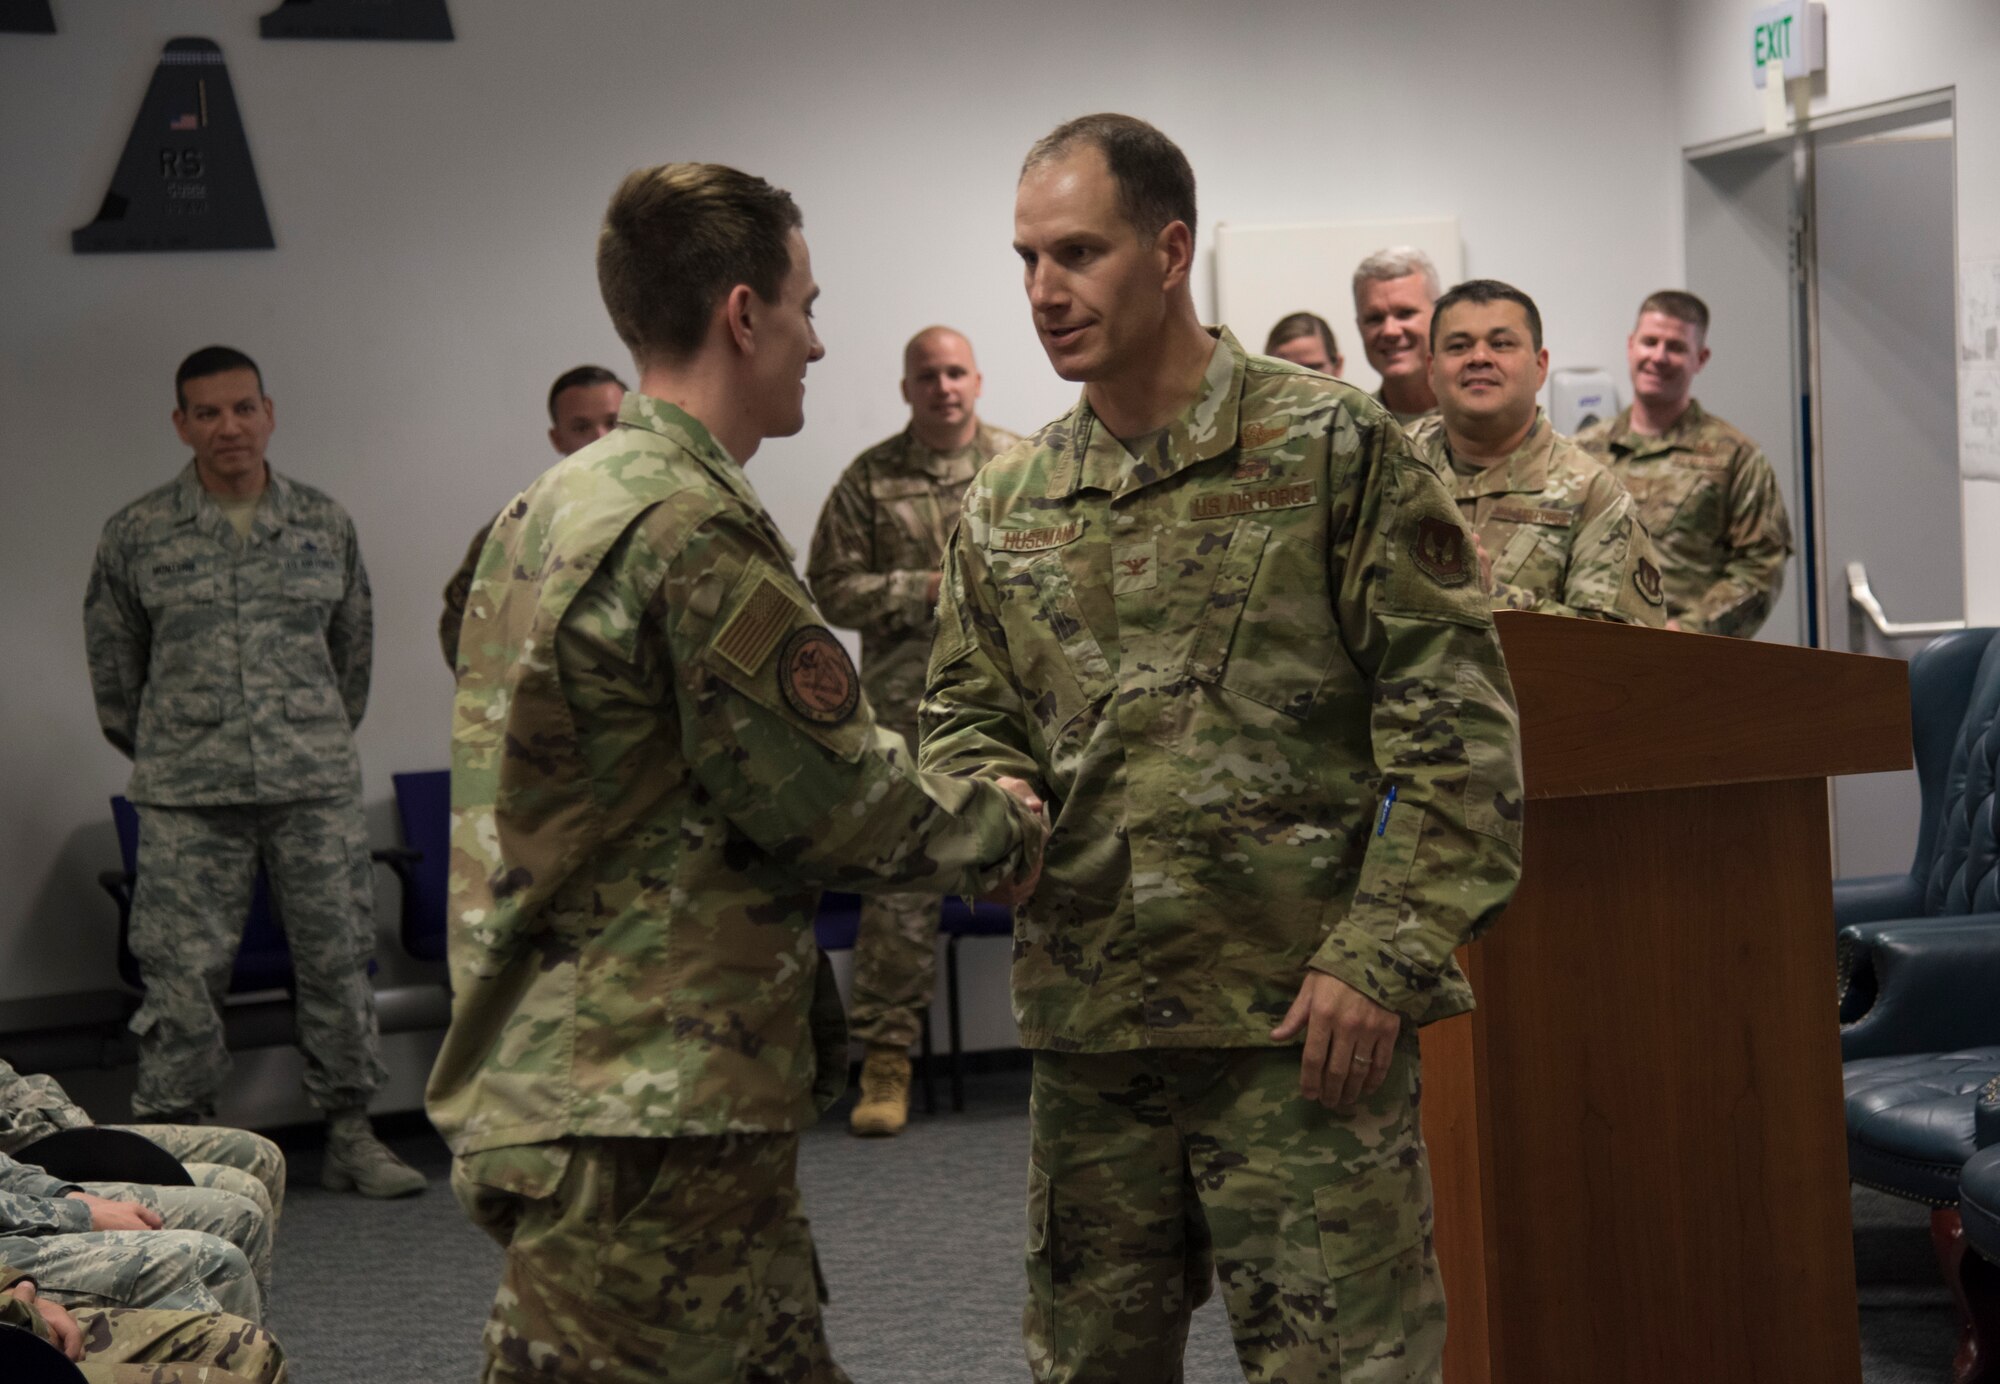 U.S. Air Force Col. Matthew S. Husemann, 86th Airlift Wing vice commander, congratulates Staff Sgt. Spencer Koepp, a C-130 aircraft maintenance craftsman with the 86th Aircraft Maintenance Squadron, on being named Airlifter of the Week at Ramstein Air Base, Germany, Sept. 12, 2019.